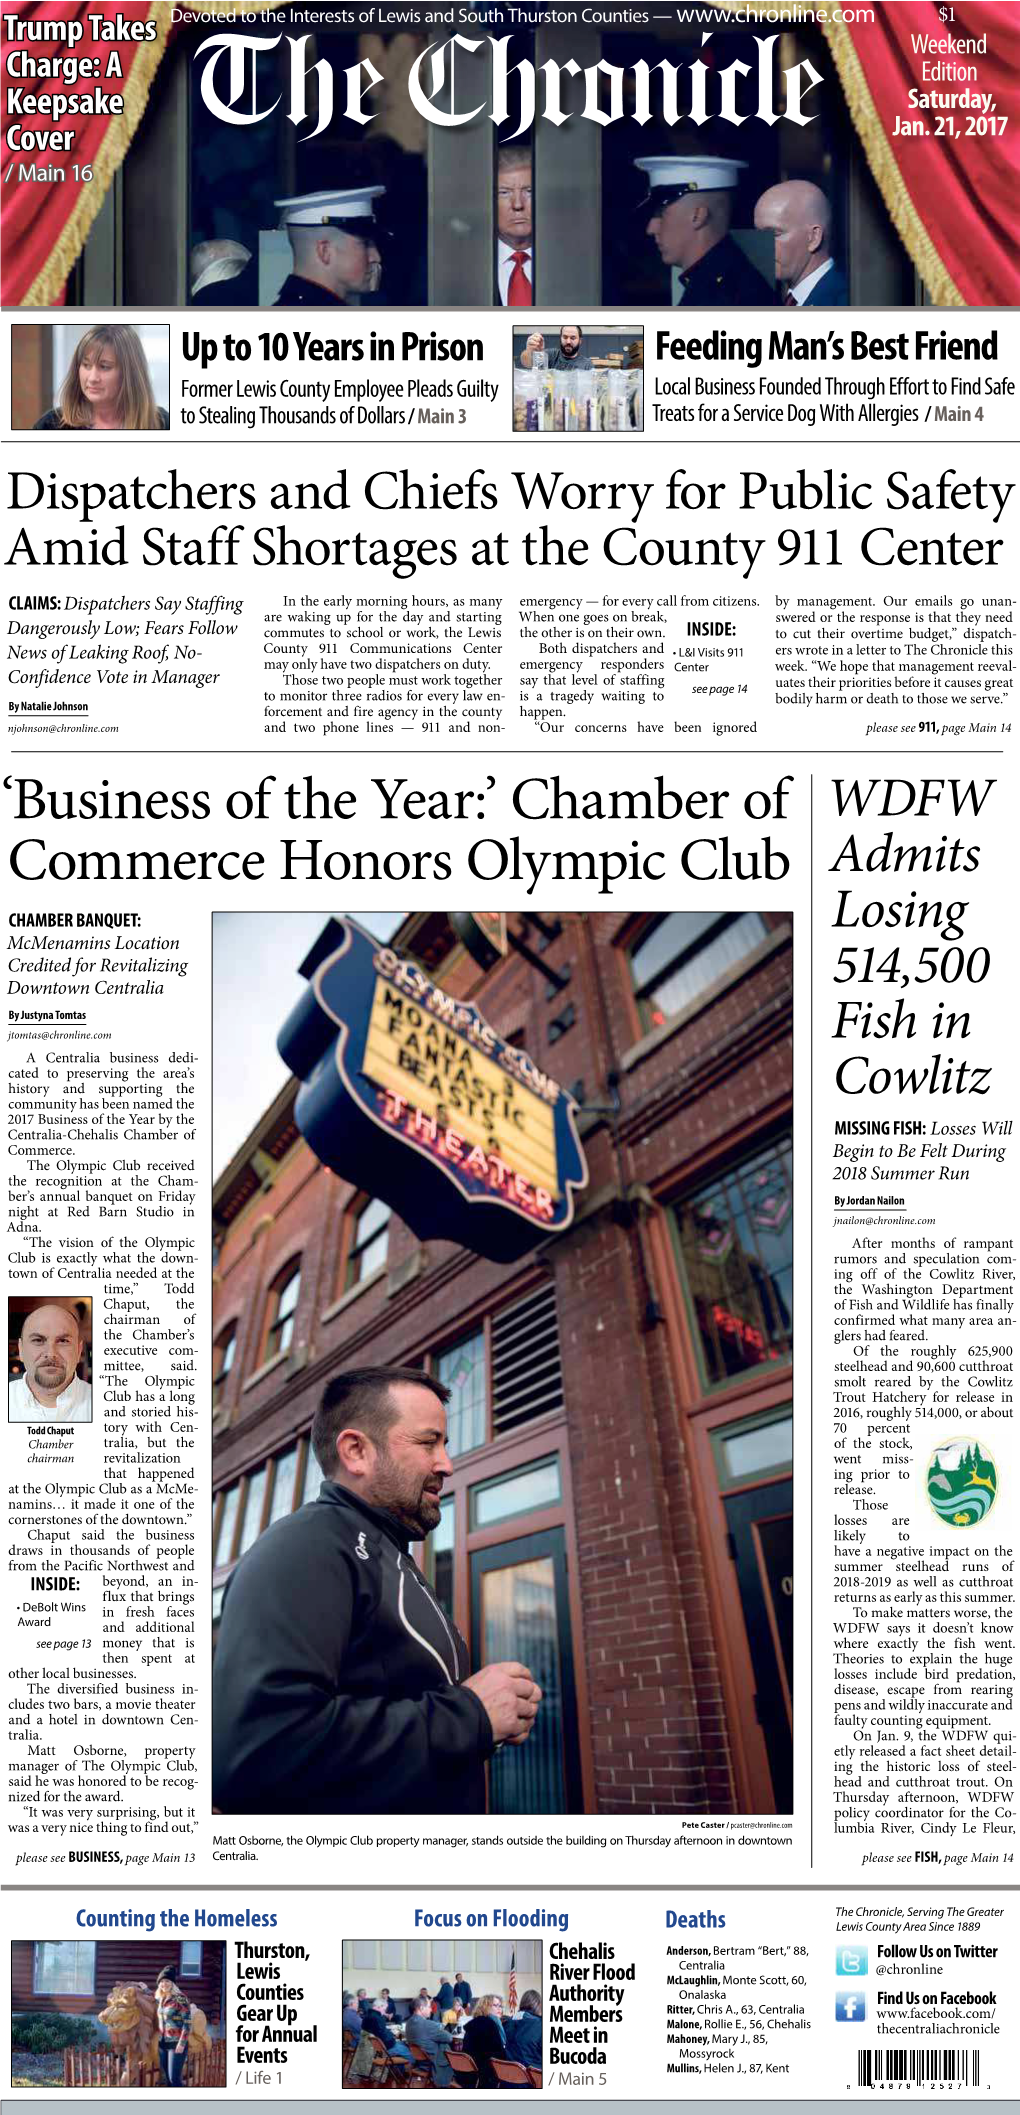 'Business of the Year:' Chamber of Commerce Honors Olympic Club